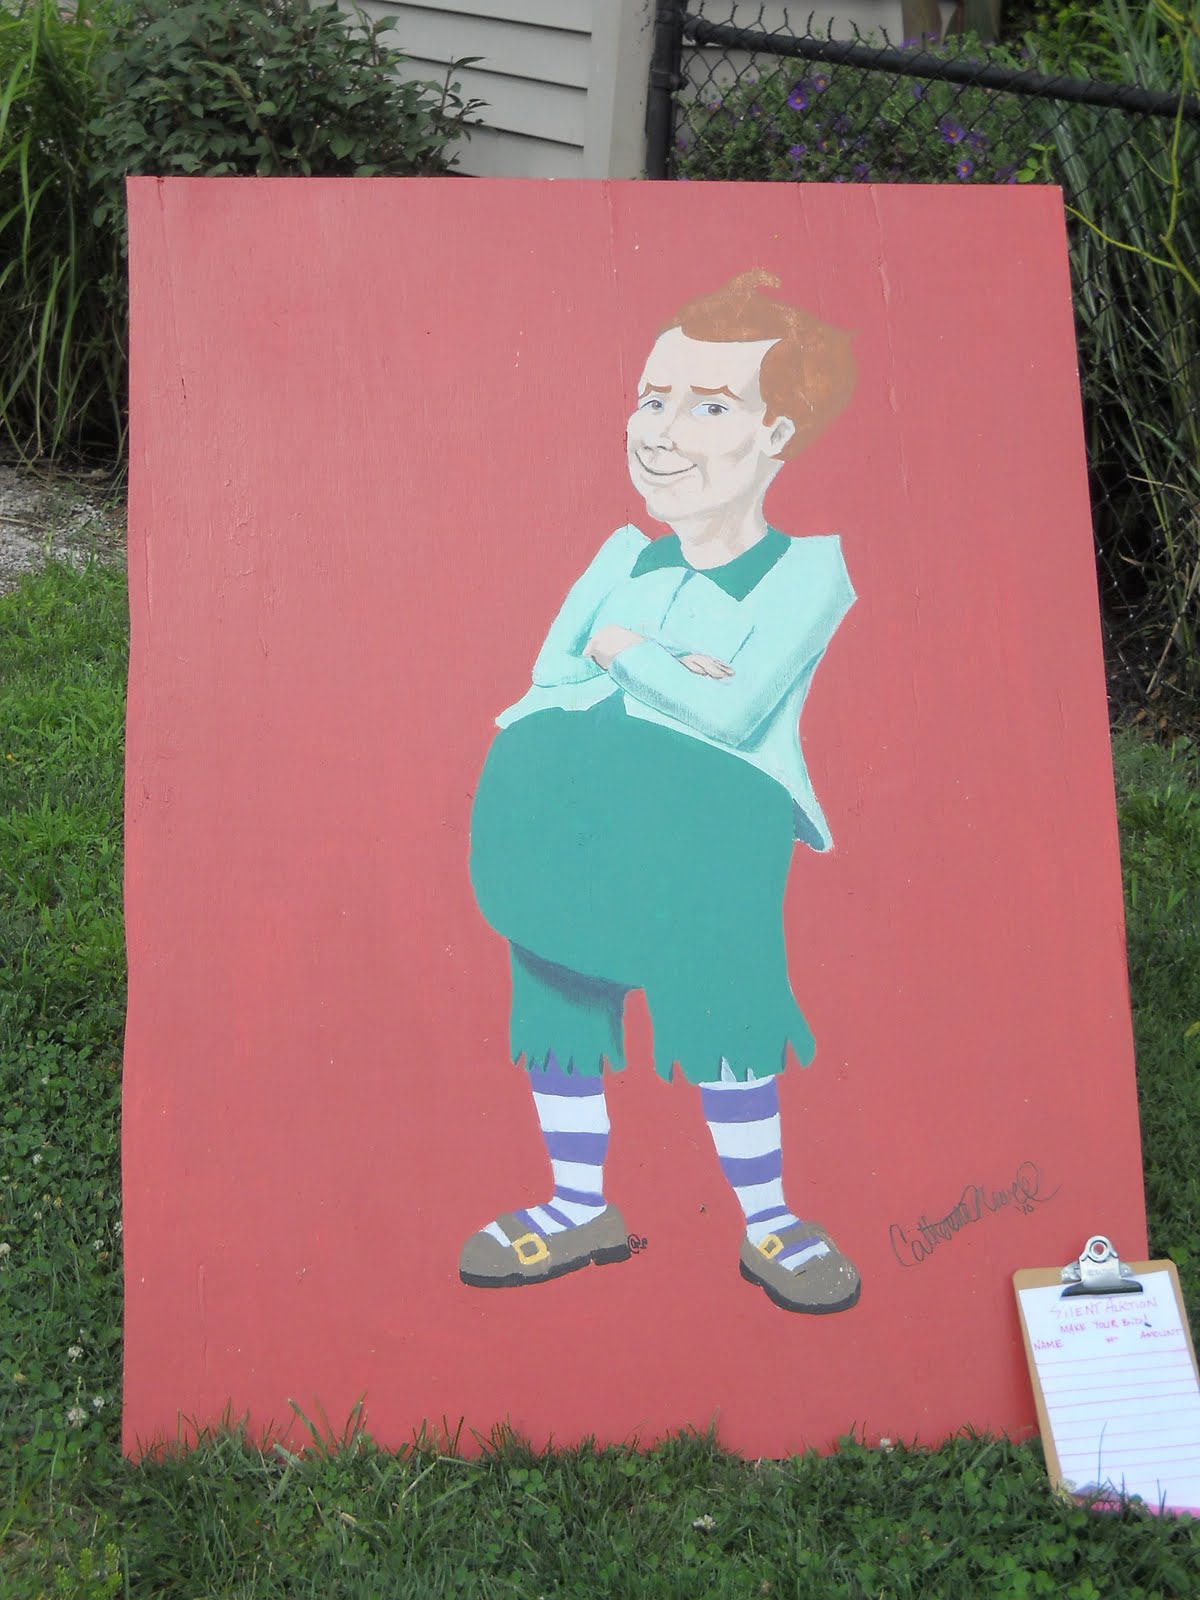 Wizard of Oz Characters: Wizard of Oz paintings